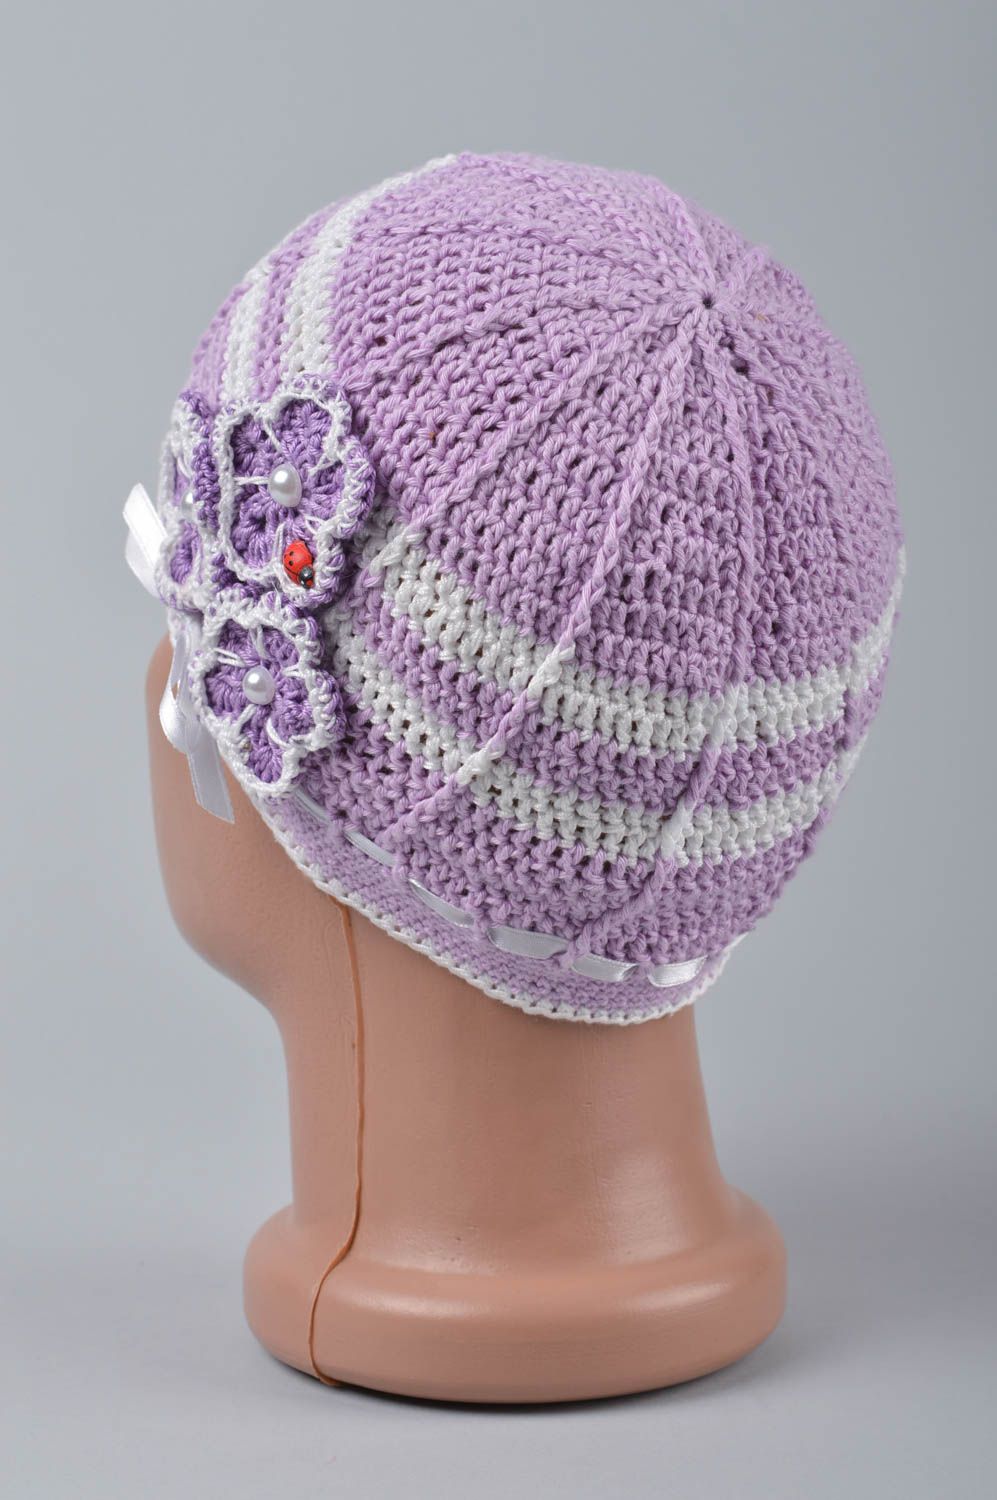 Unusual handmade crochet hat cute hats fashion accessories gifts for kids photo 5